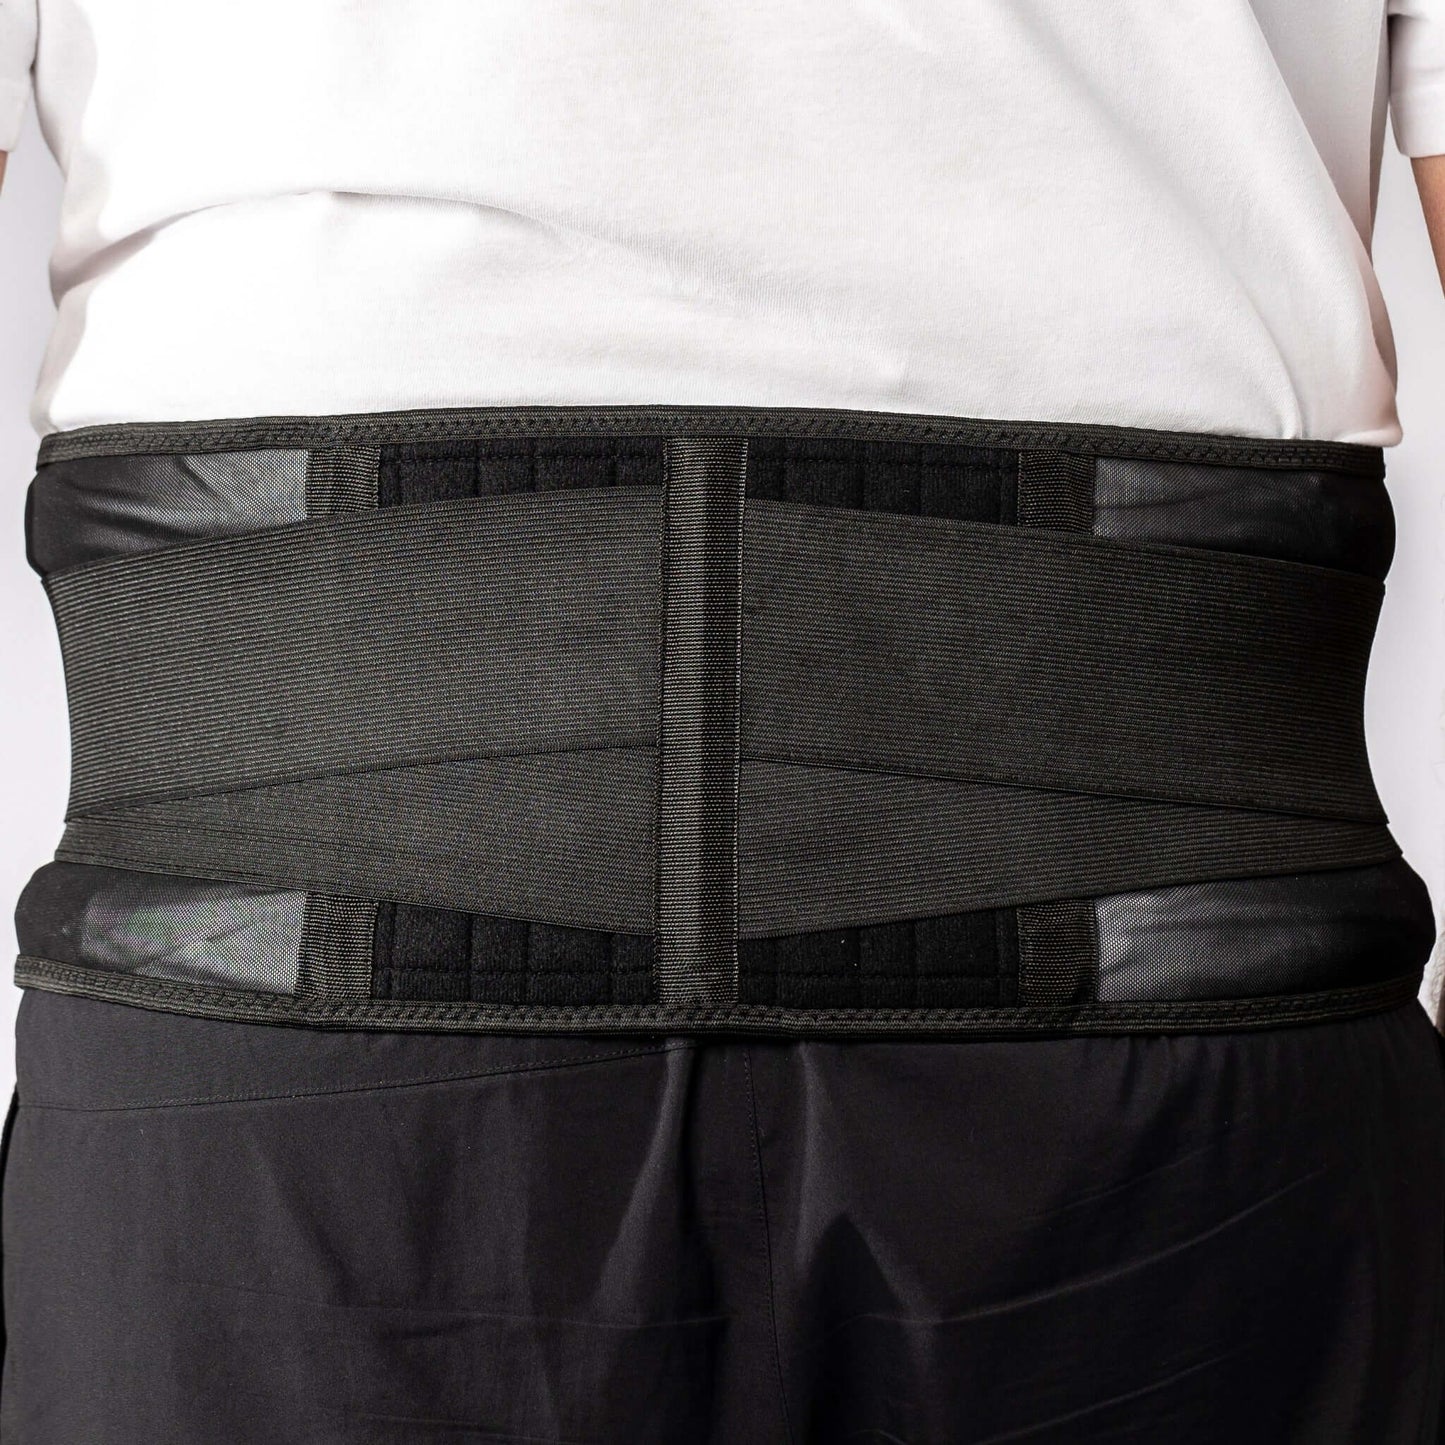 Middle aged man wearing a black biomagnetic Back Support with triple adhesive closure, vented sides and supportive back with 20 therapeutic magnets.